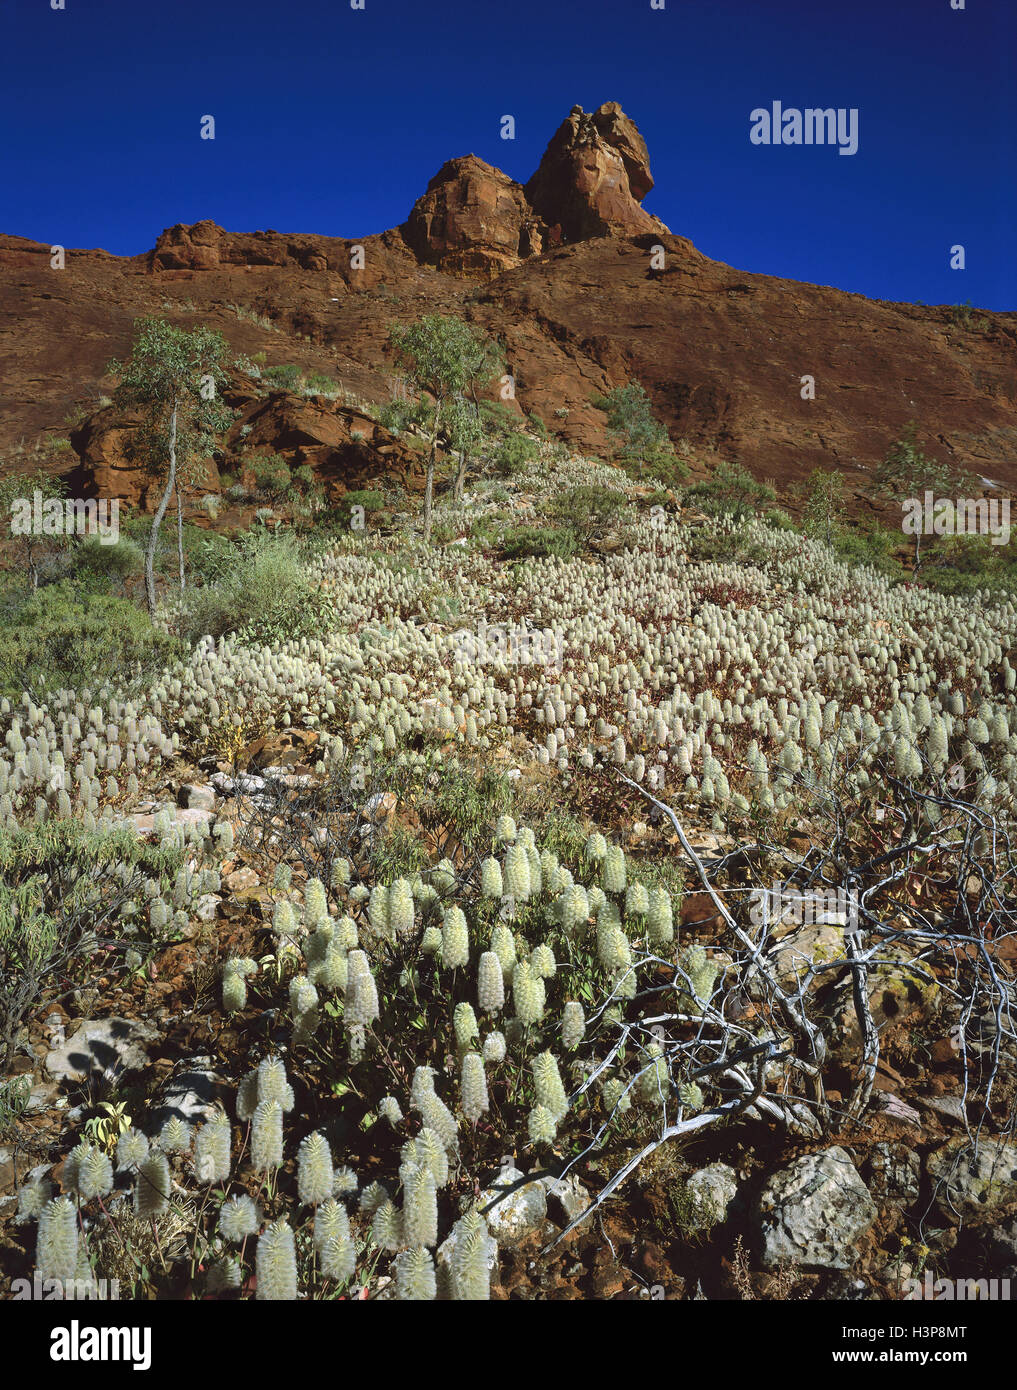 Sandstone formation with Green pussytails (Ptilotus macrocephalus) Stock Photo